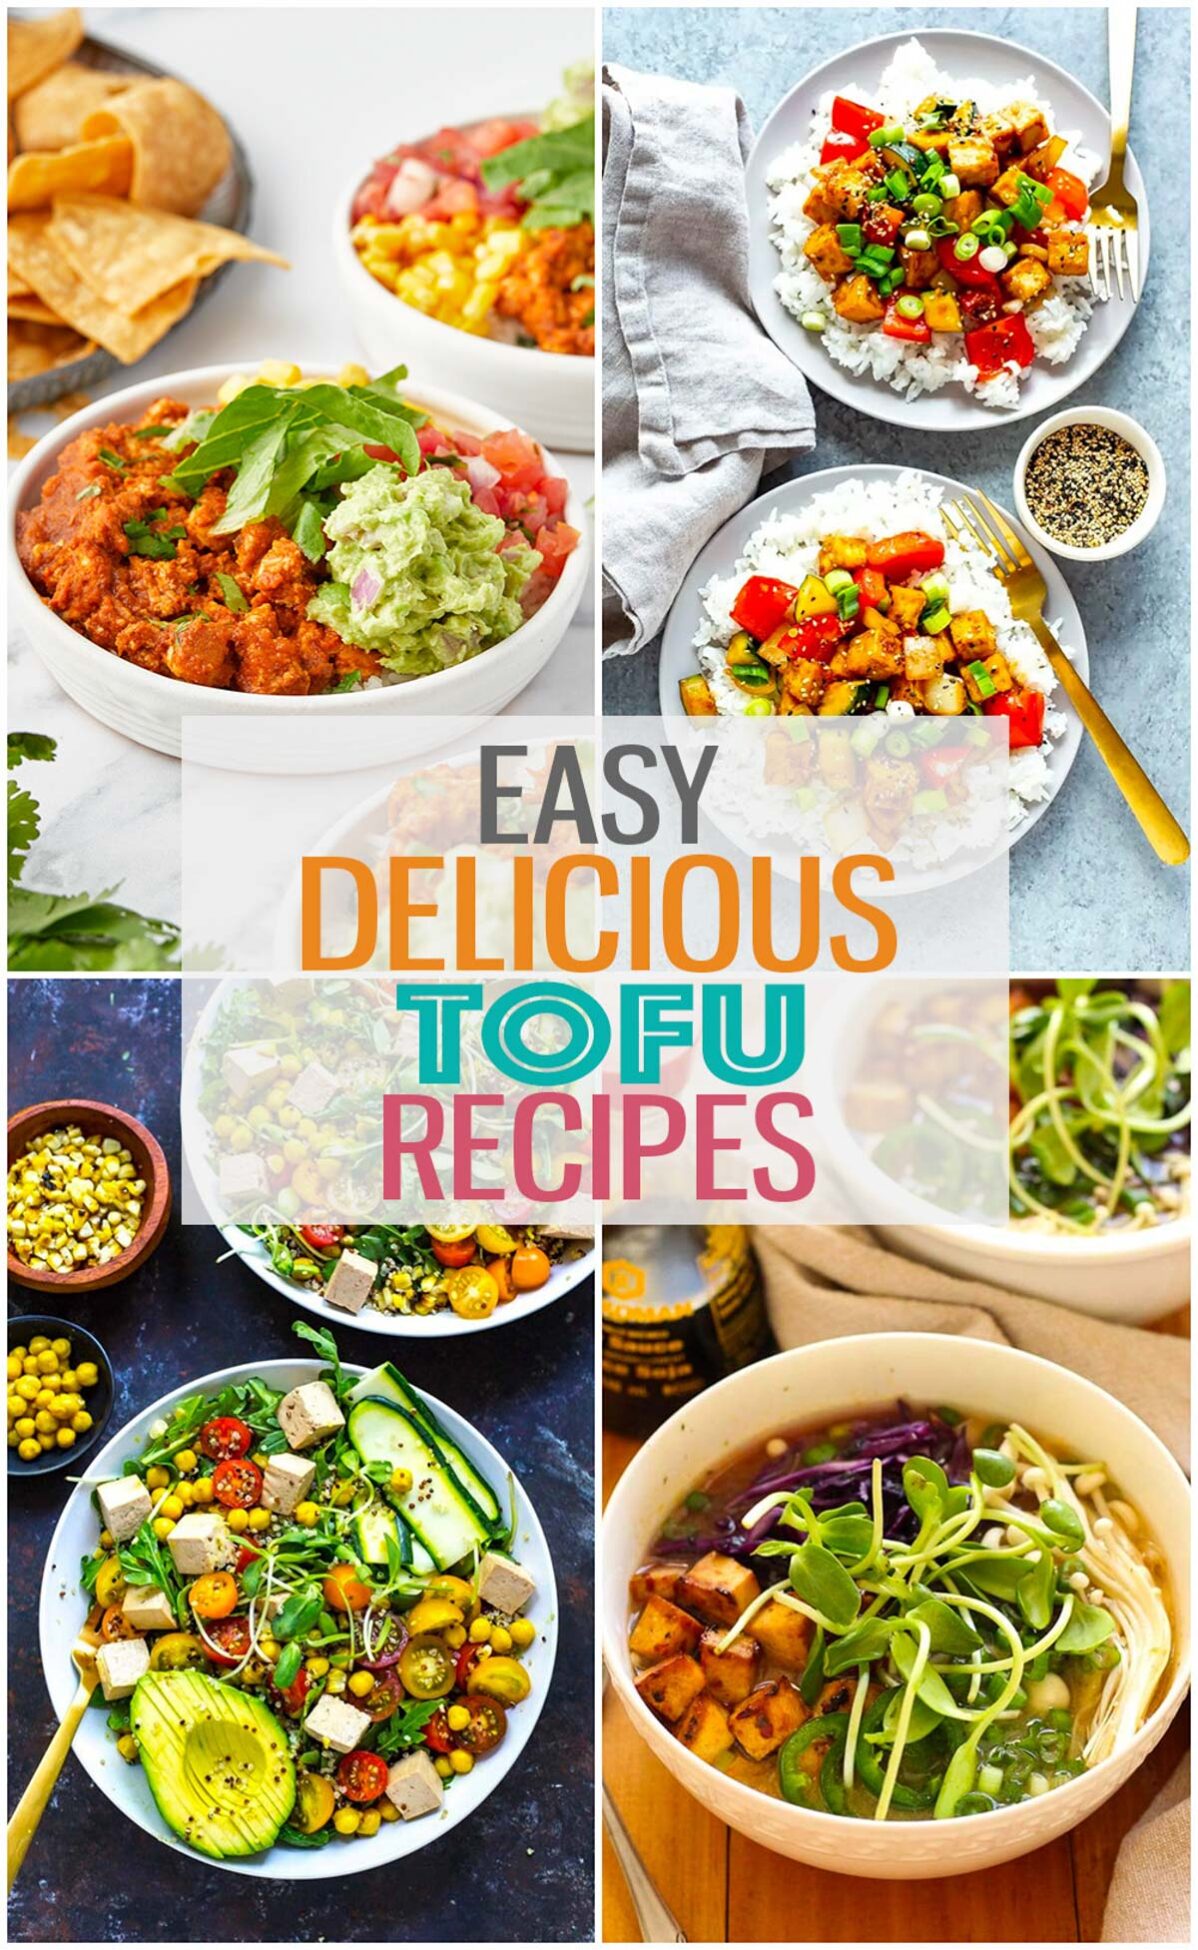 A collage of four different tofu recipes with the text "Easy Delicious Tofu Recipes" layered over top.